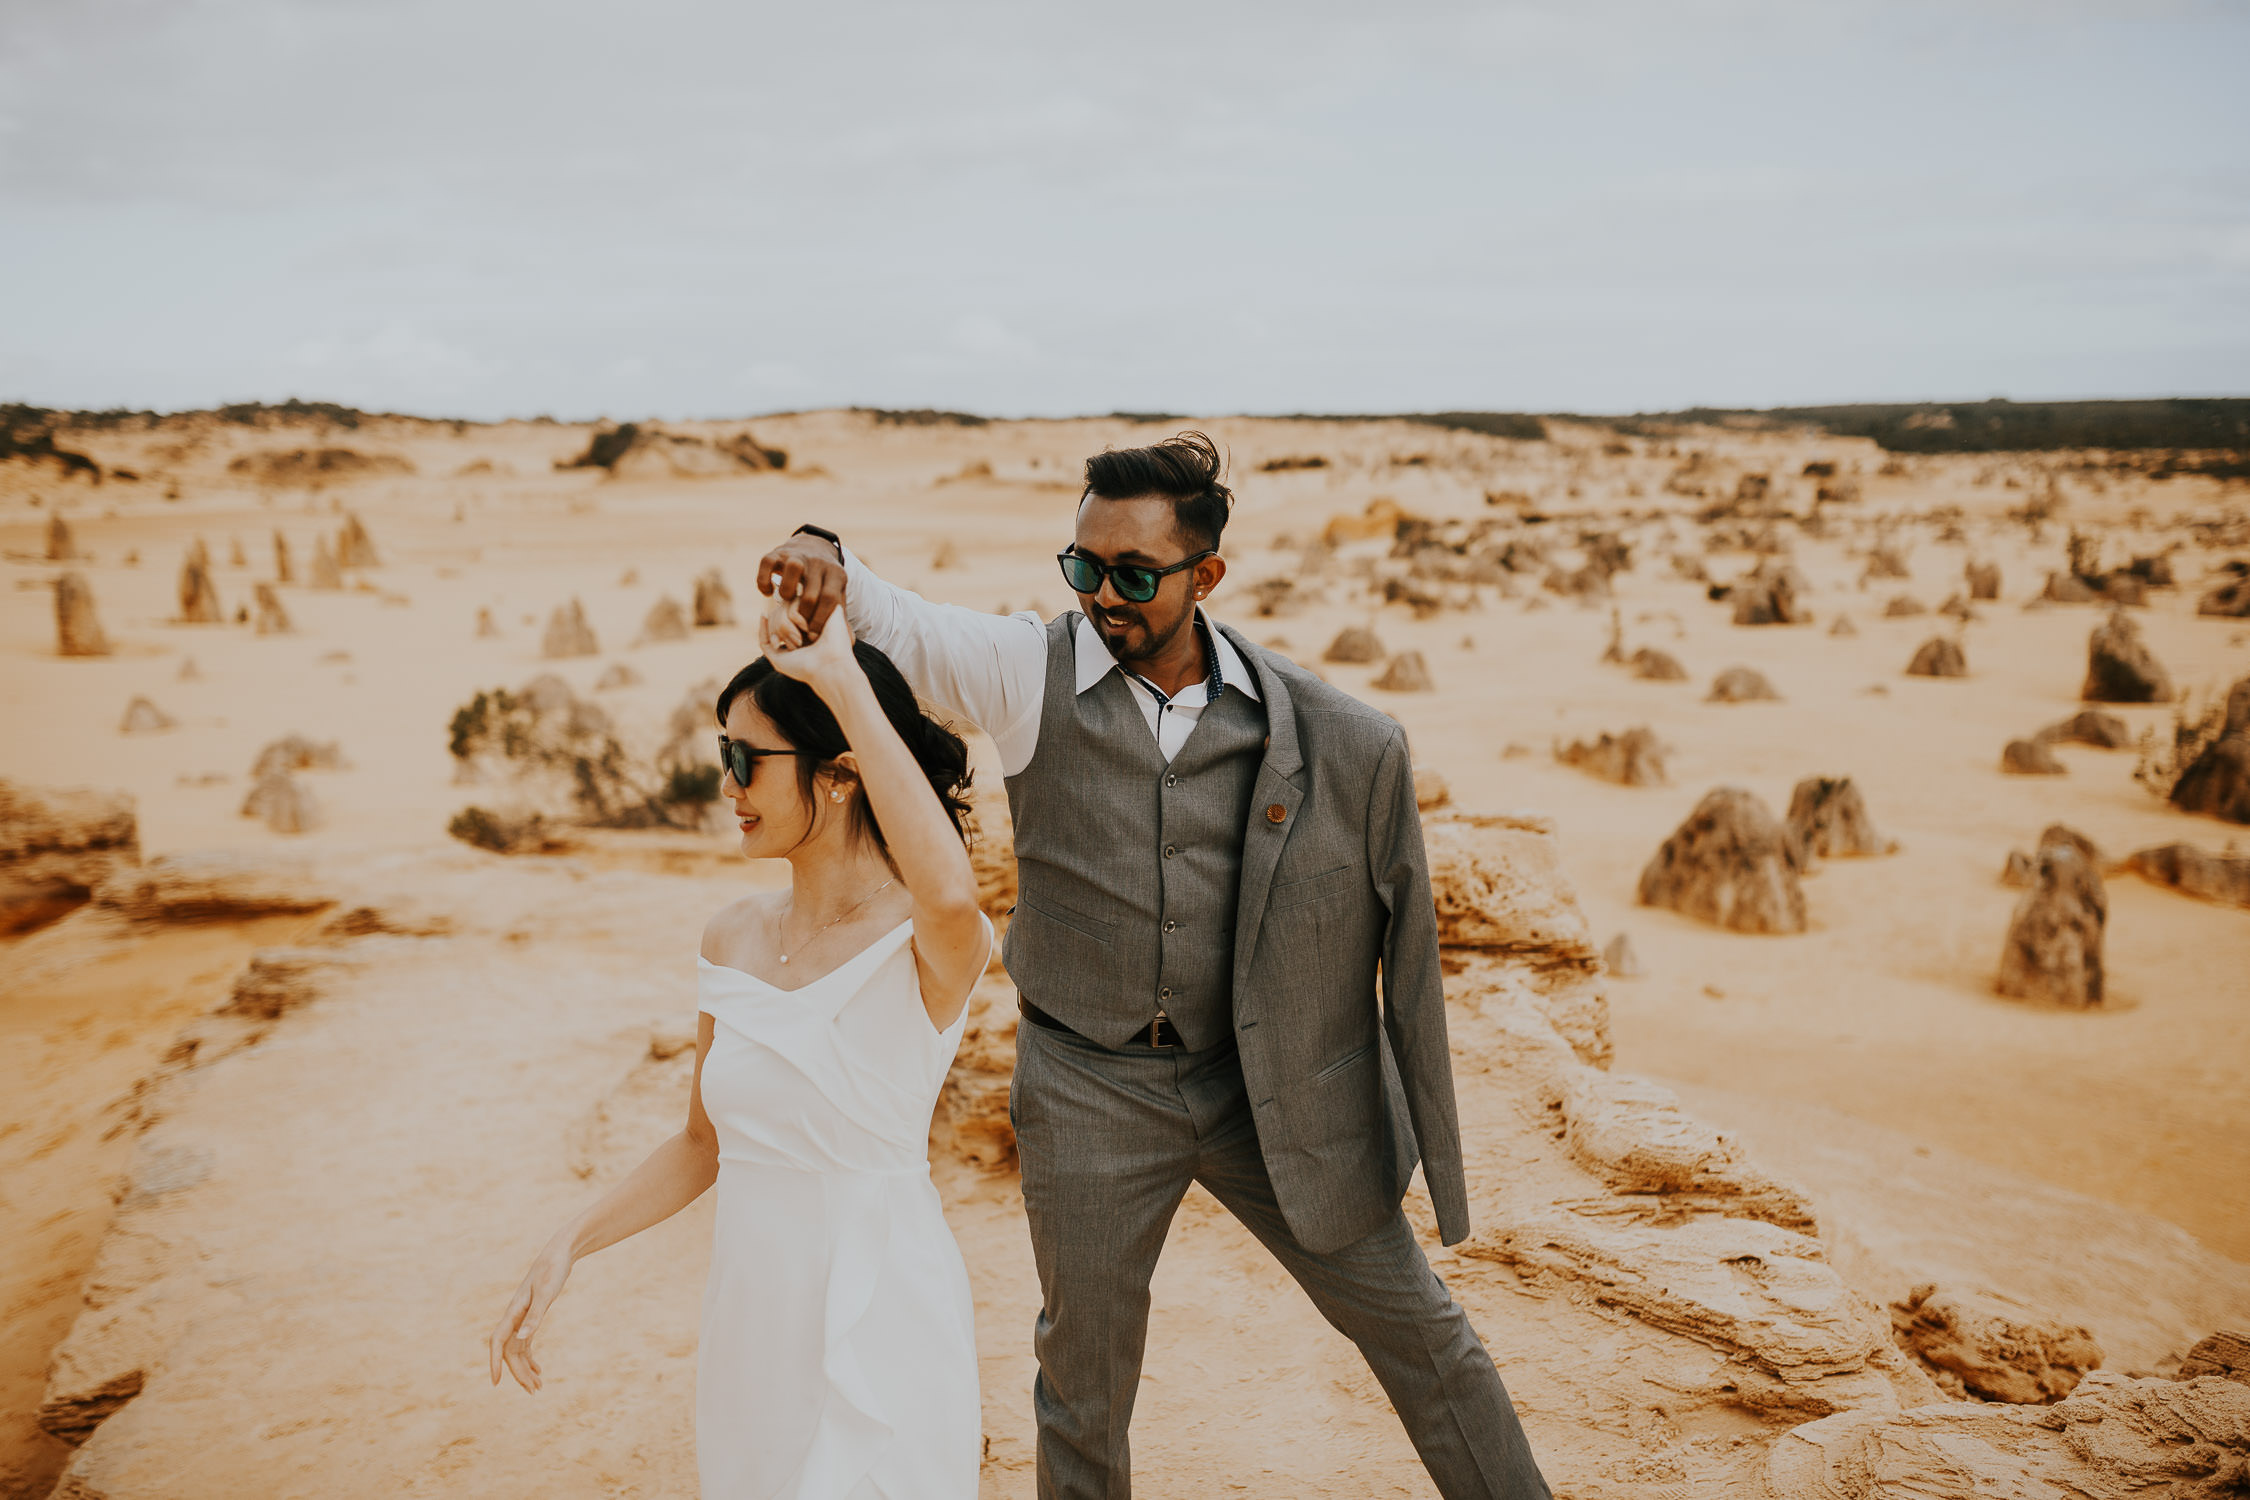 Perth pre-wedding at Lancelin sand dunes, Pinnacles Desert and forest by Naz on OneThreeOneFour 9